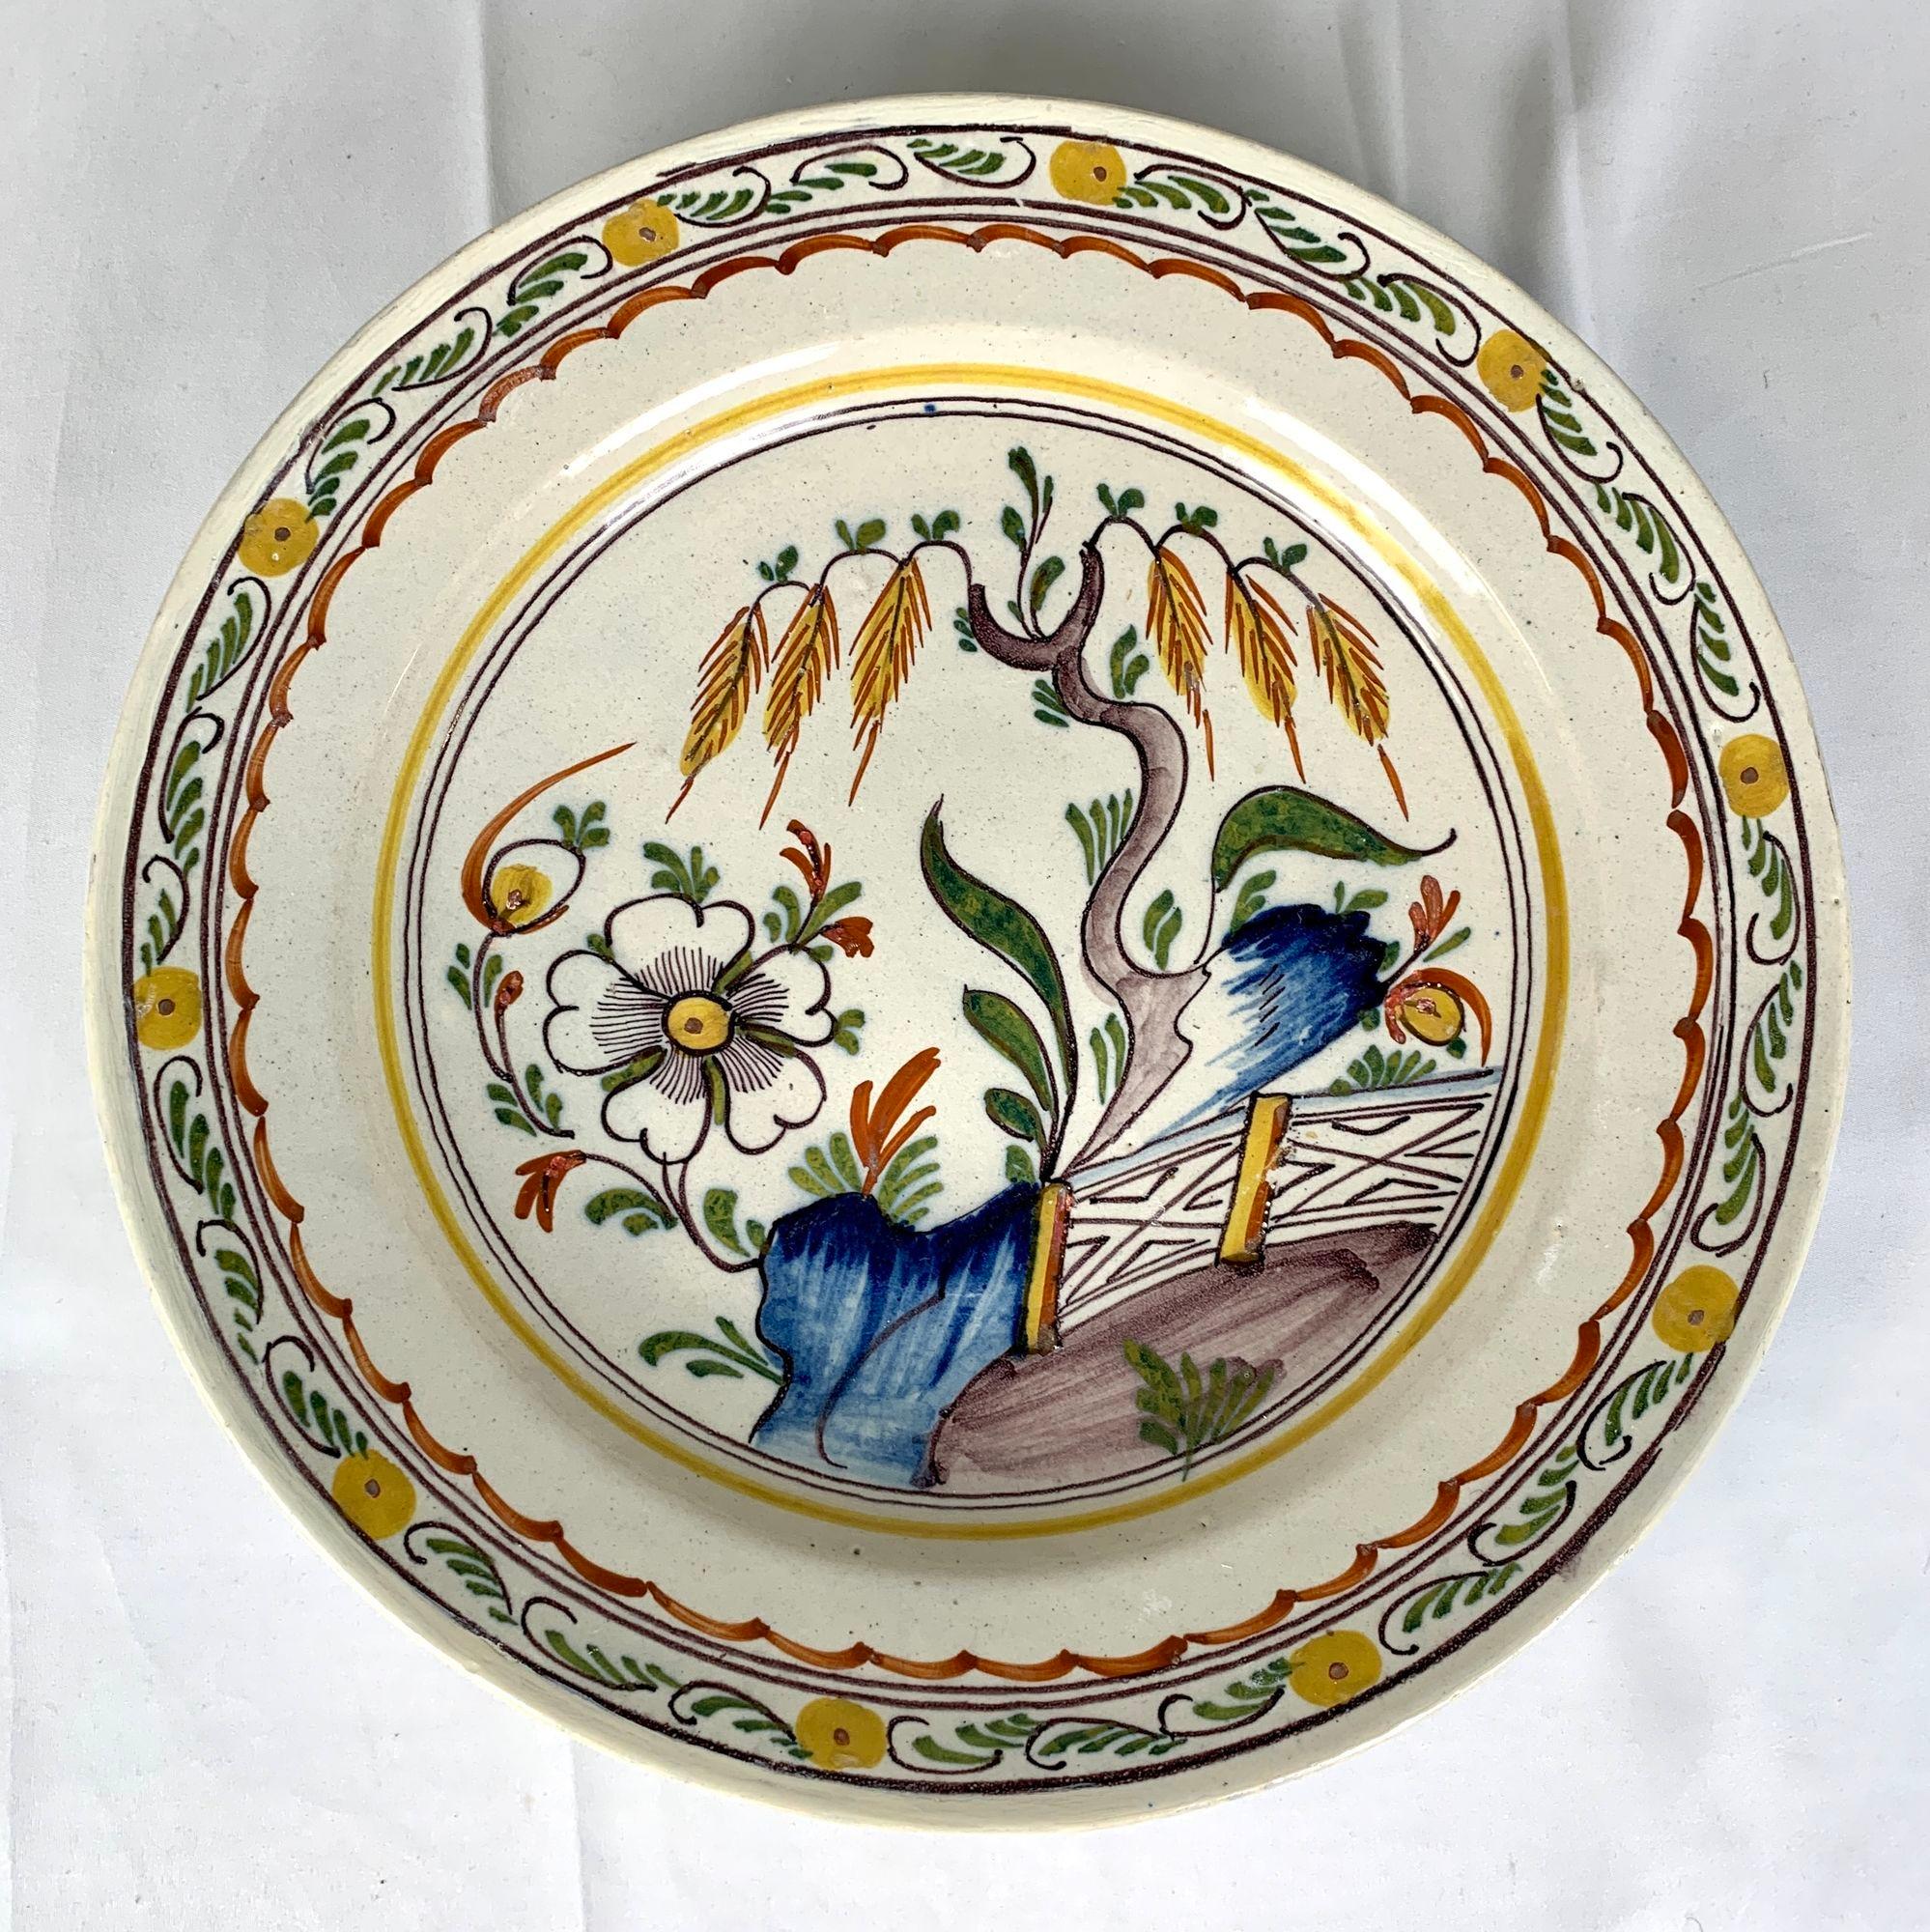 This collection of three antique Dutch Delft chargers showcases the craftsmanship of the 18th-century potteries in the city of Delft.
Each charger is hand painted in a vibrant array of polychrome hues, including cobalt blue, green, yellow, iron red,